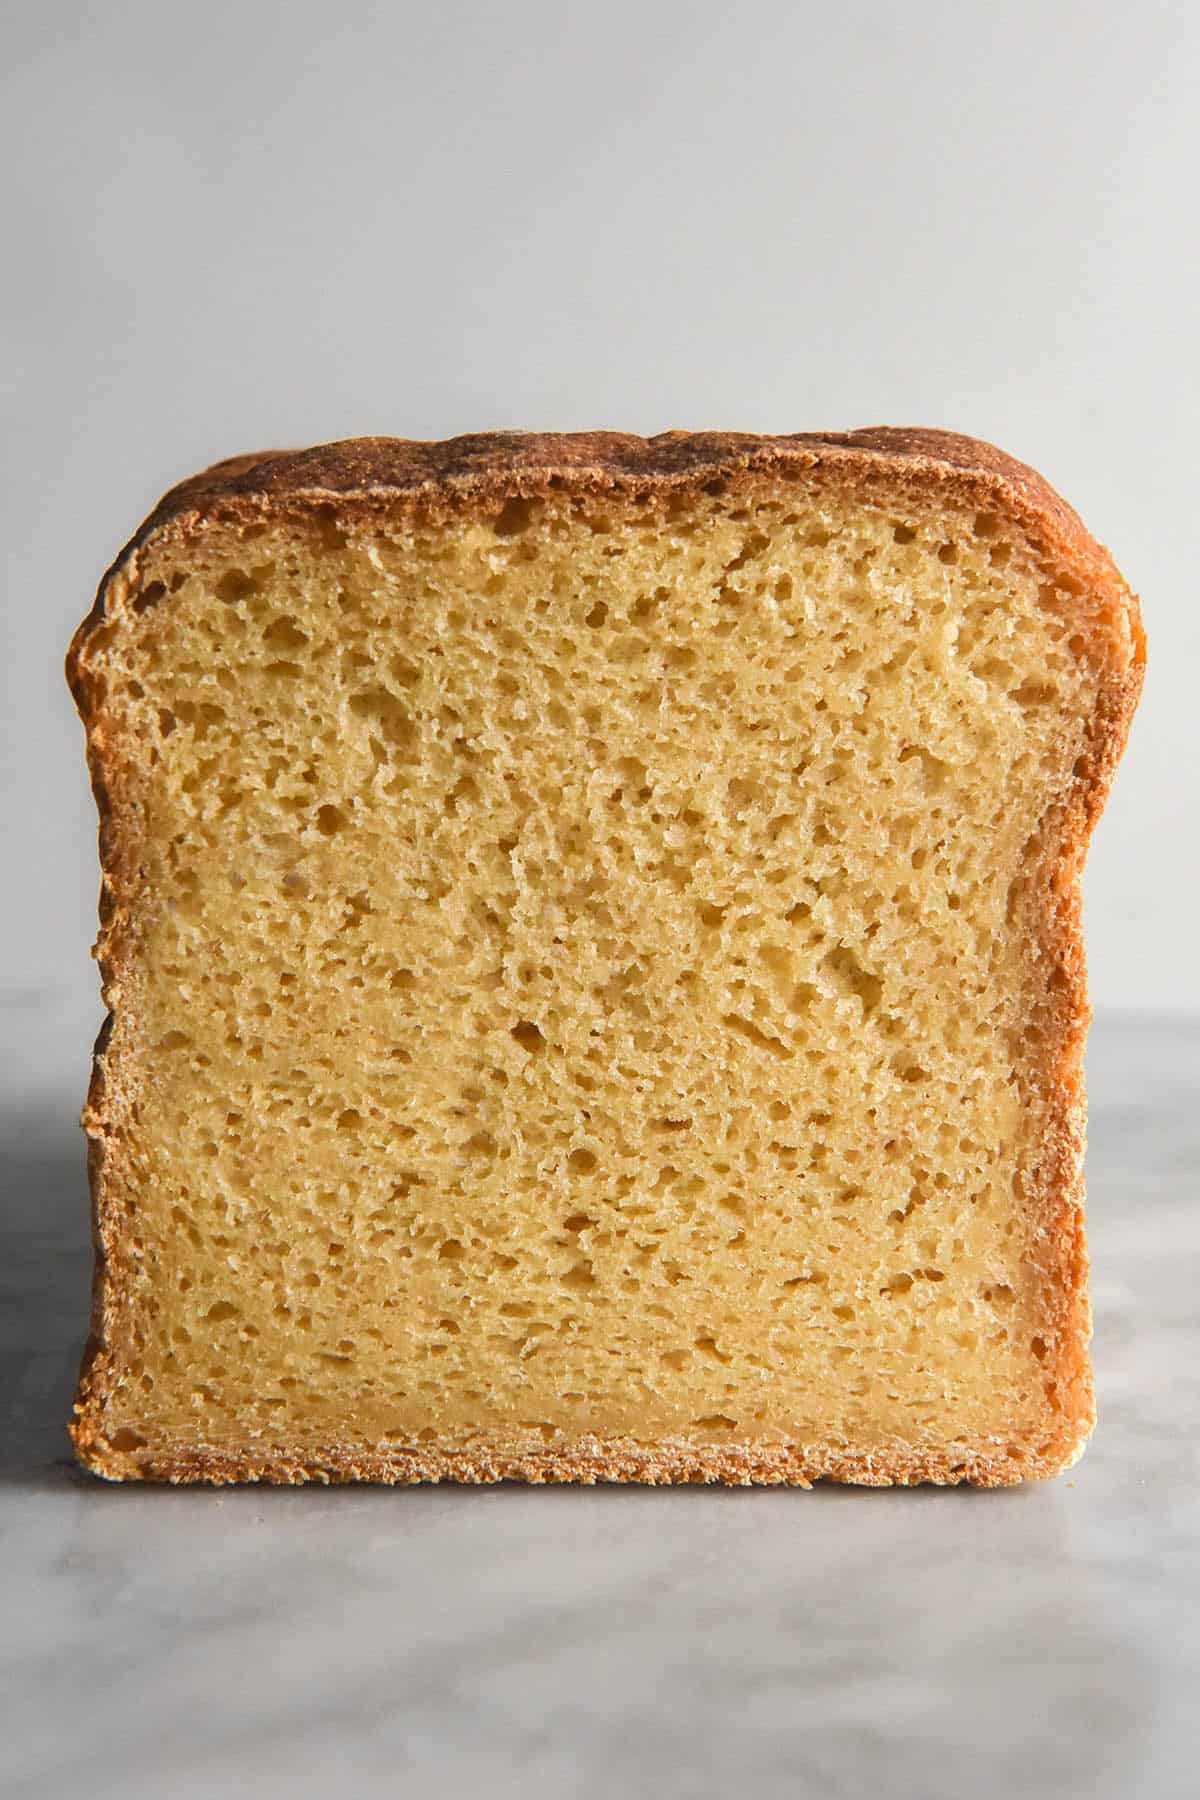 A close up side on view of a loaf of grain free bread on white table against a white backdrop. A slice has been cut from the loaf, revealing the fluffy crumb underneath